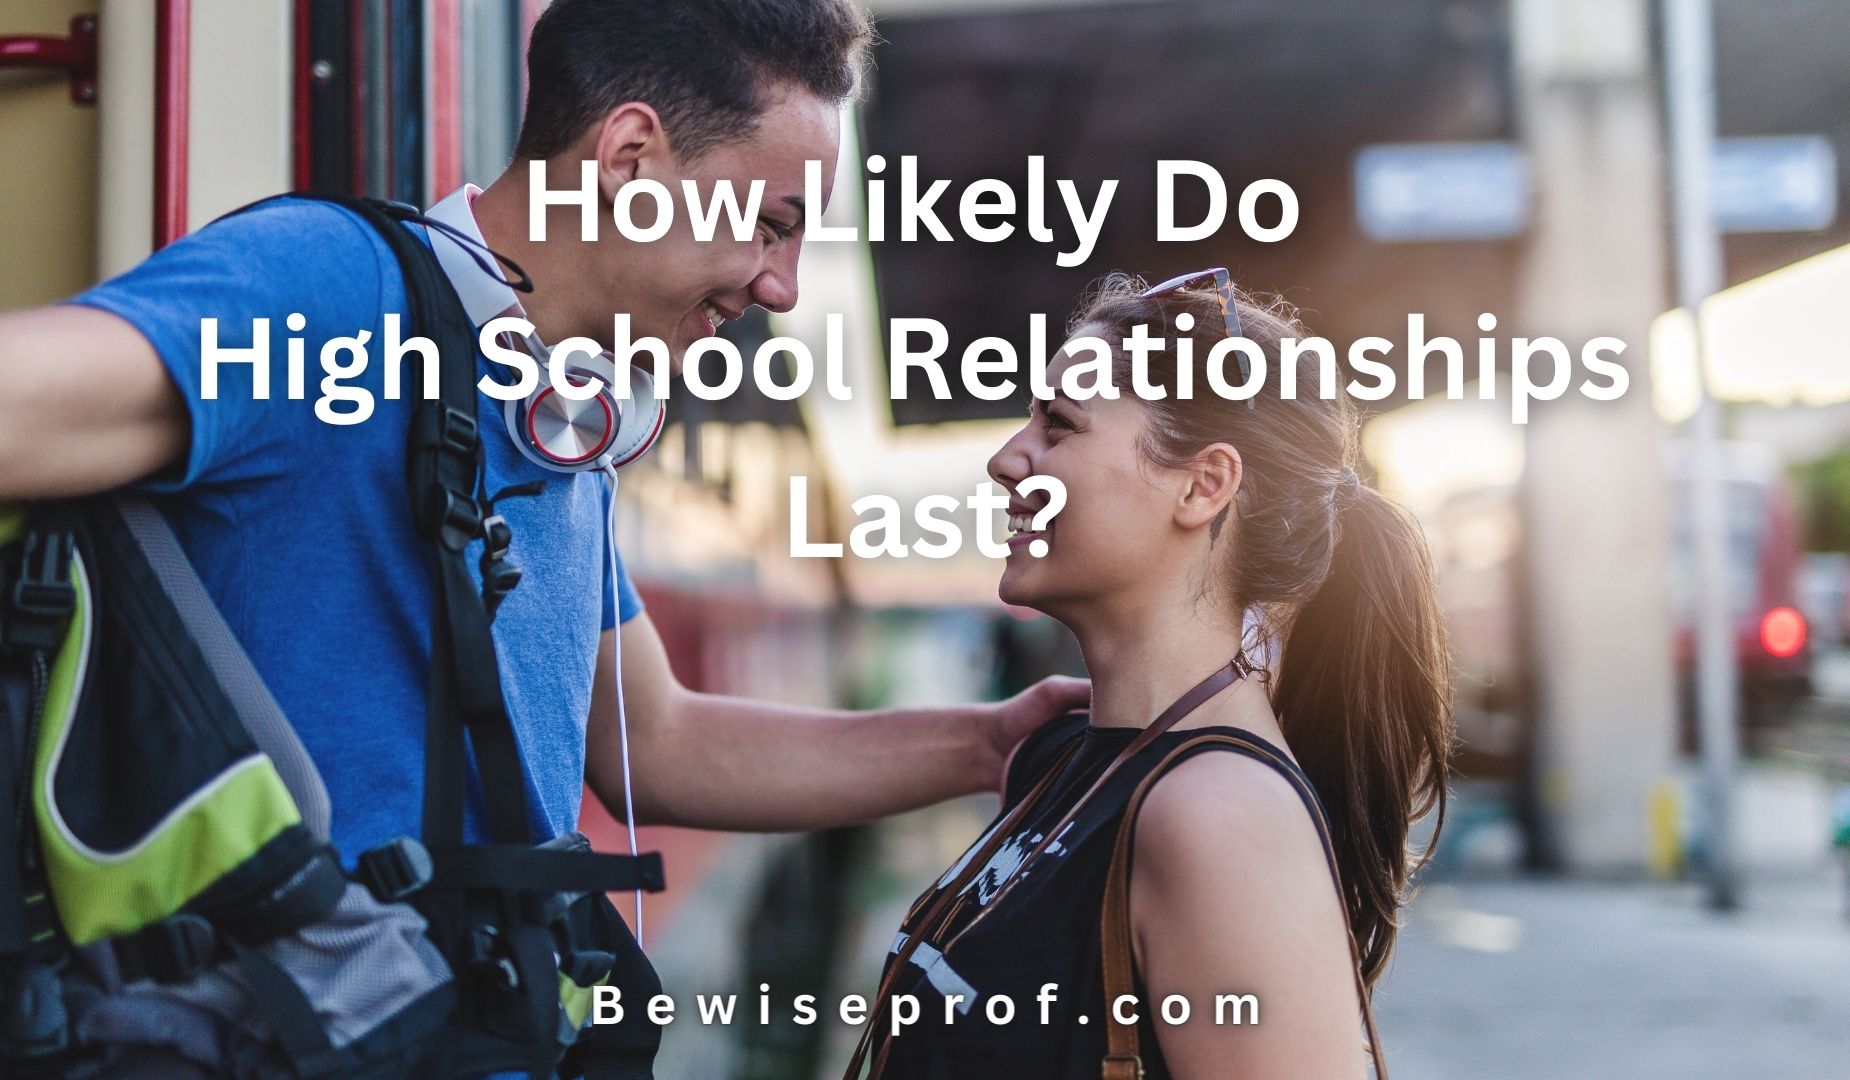 How Likely Do High School Relationships Last?